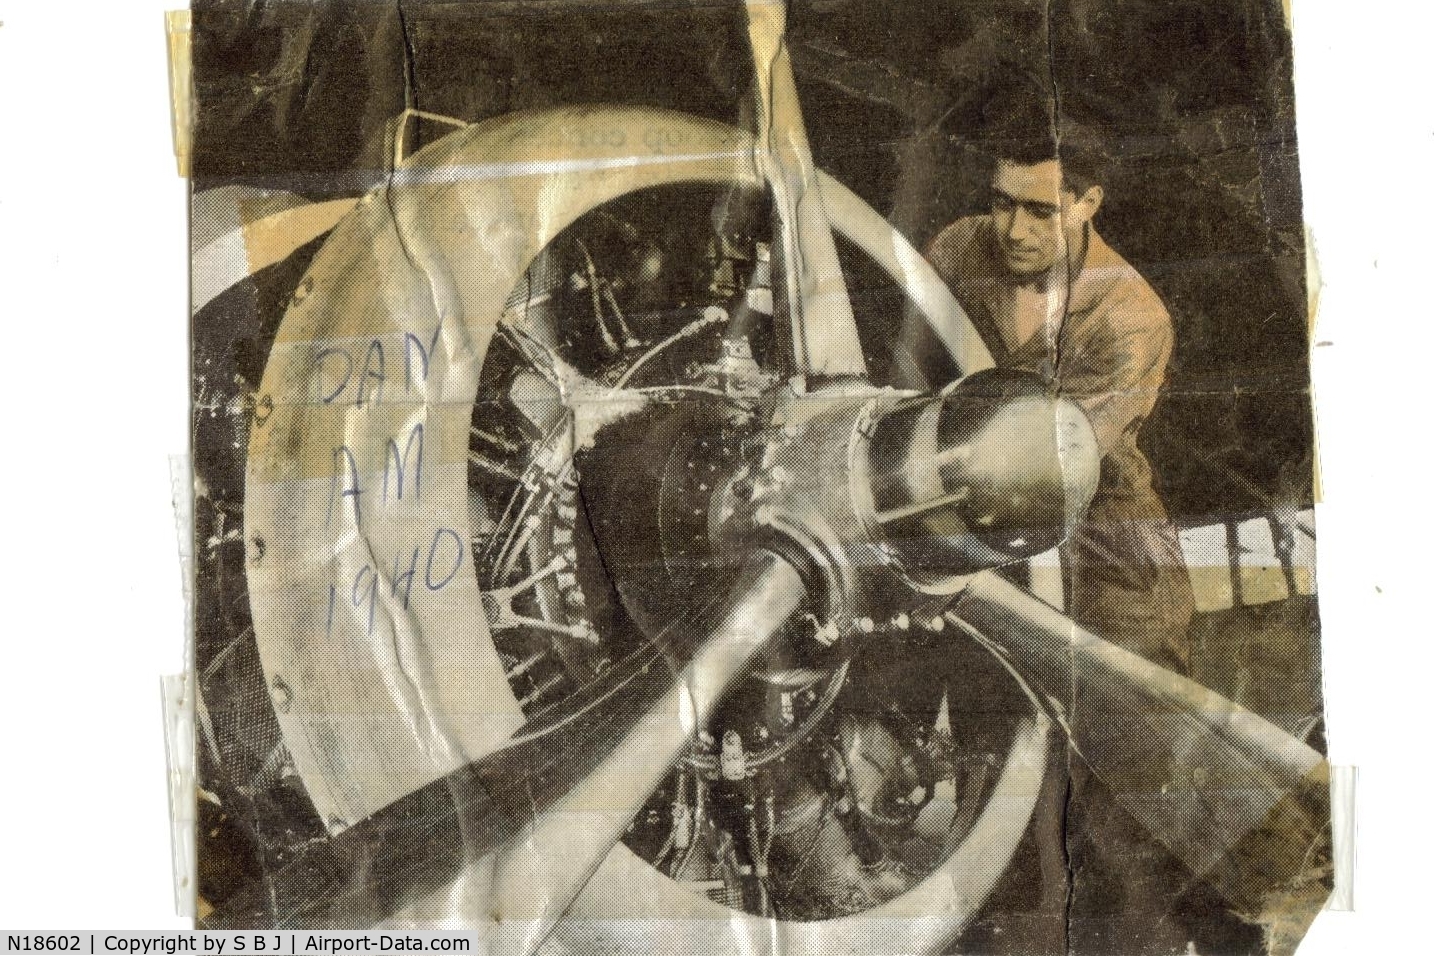 N18602, 1939 Boeing 314 C/N 1989, Not sure which Clipper this engine is on,but it is my dad at Treasure Island (SF Bay) when he worked for Pan Am as a mechanic.Pic was when a well known magazine doing an article on Pan Am, asked my dad to pose for it.